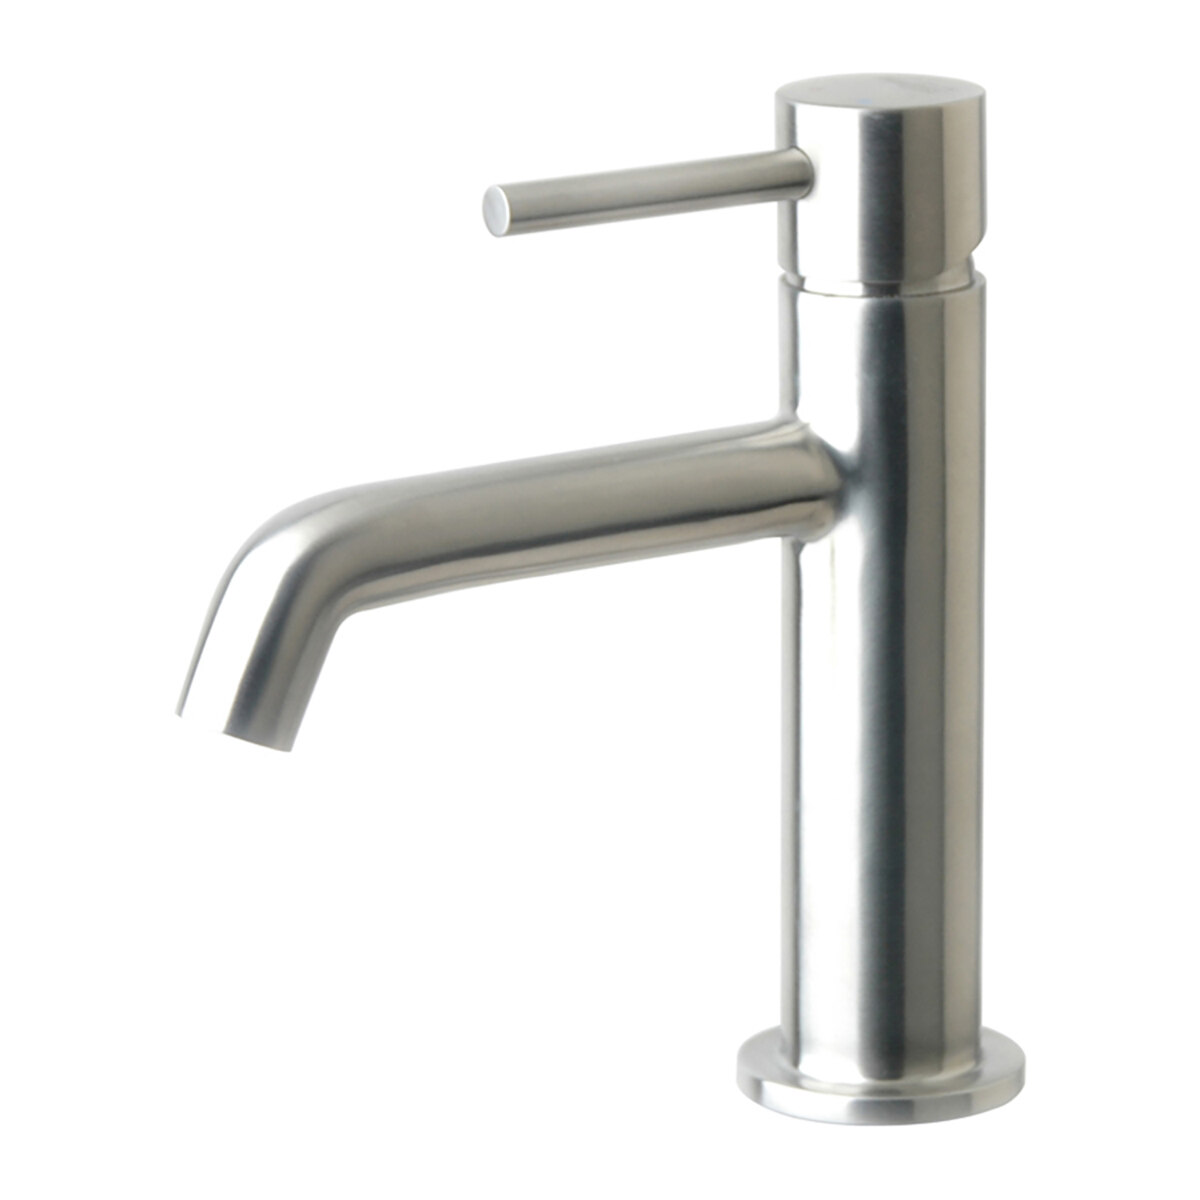 China Touchless Bathroom Sink Faucet Manufacturers